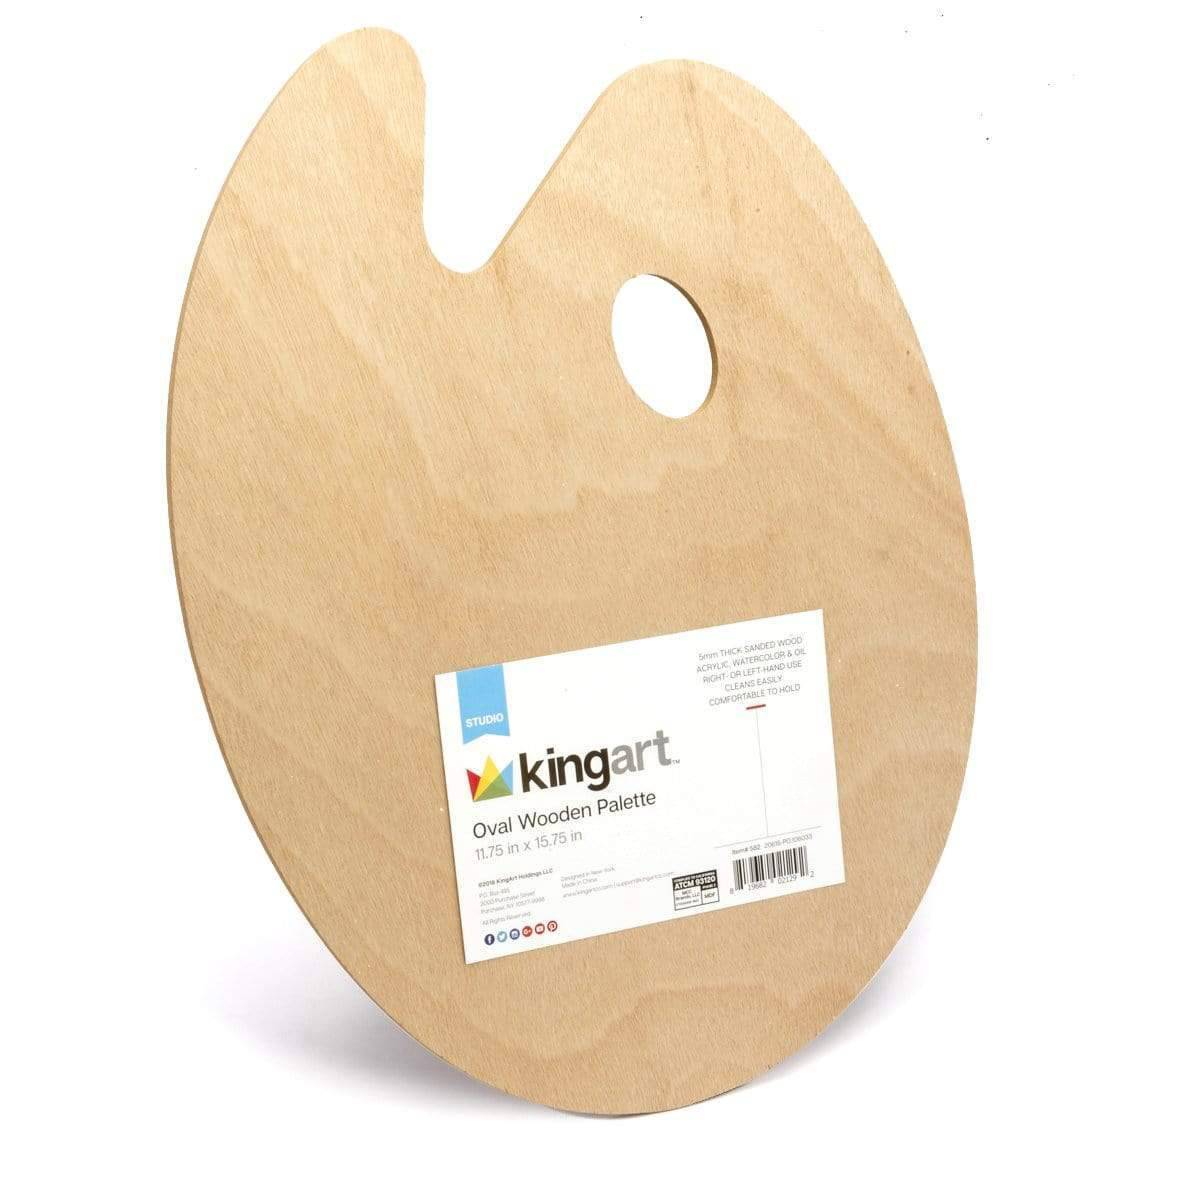 11.8*9.2 Extra Large Wooden Oval-Shaped Artist Painting Palette